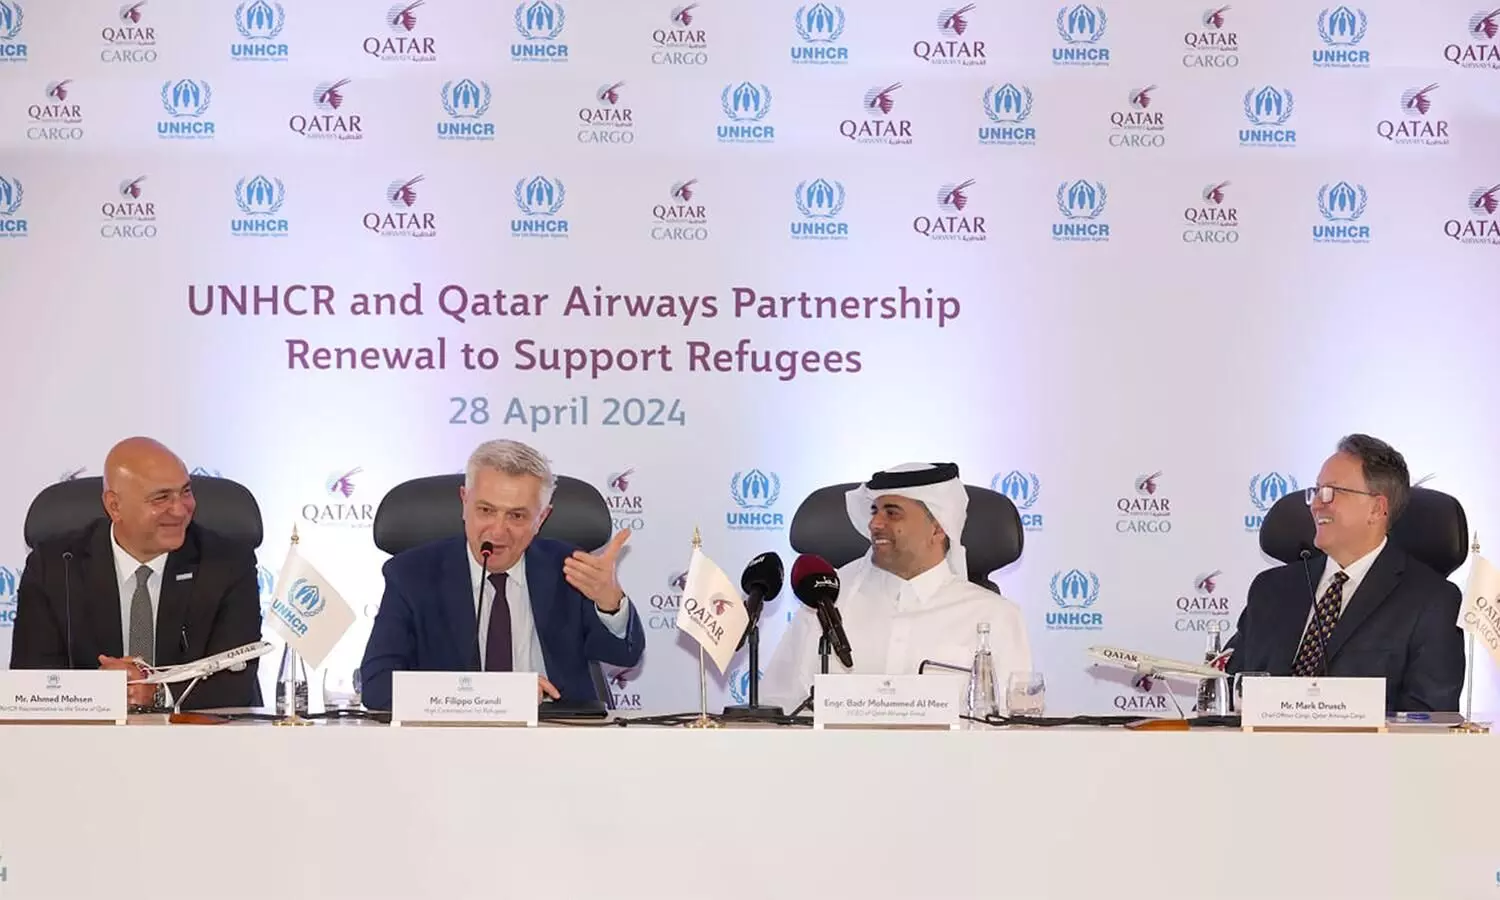 UNHCR’s Representative to the State of Qatar Ahmed Mohsen, the UN High Commissioner for Refugees Filippo Grandi, Qatar Airways Group chief executive officer Badr Mohammed Al-Meer and Qatar Airways chief cargo officer Mark Drusch.